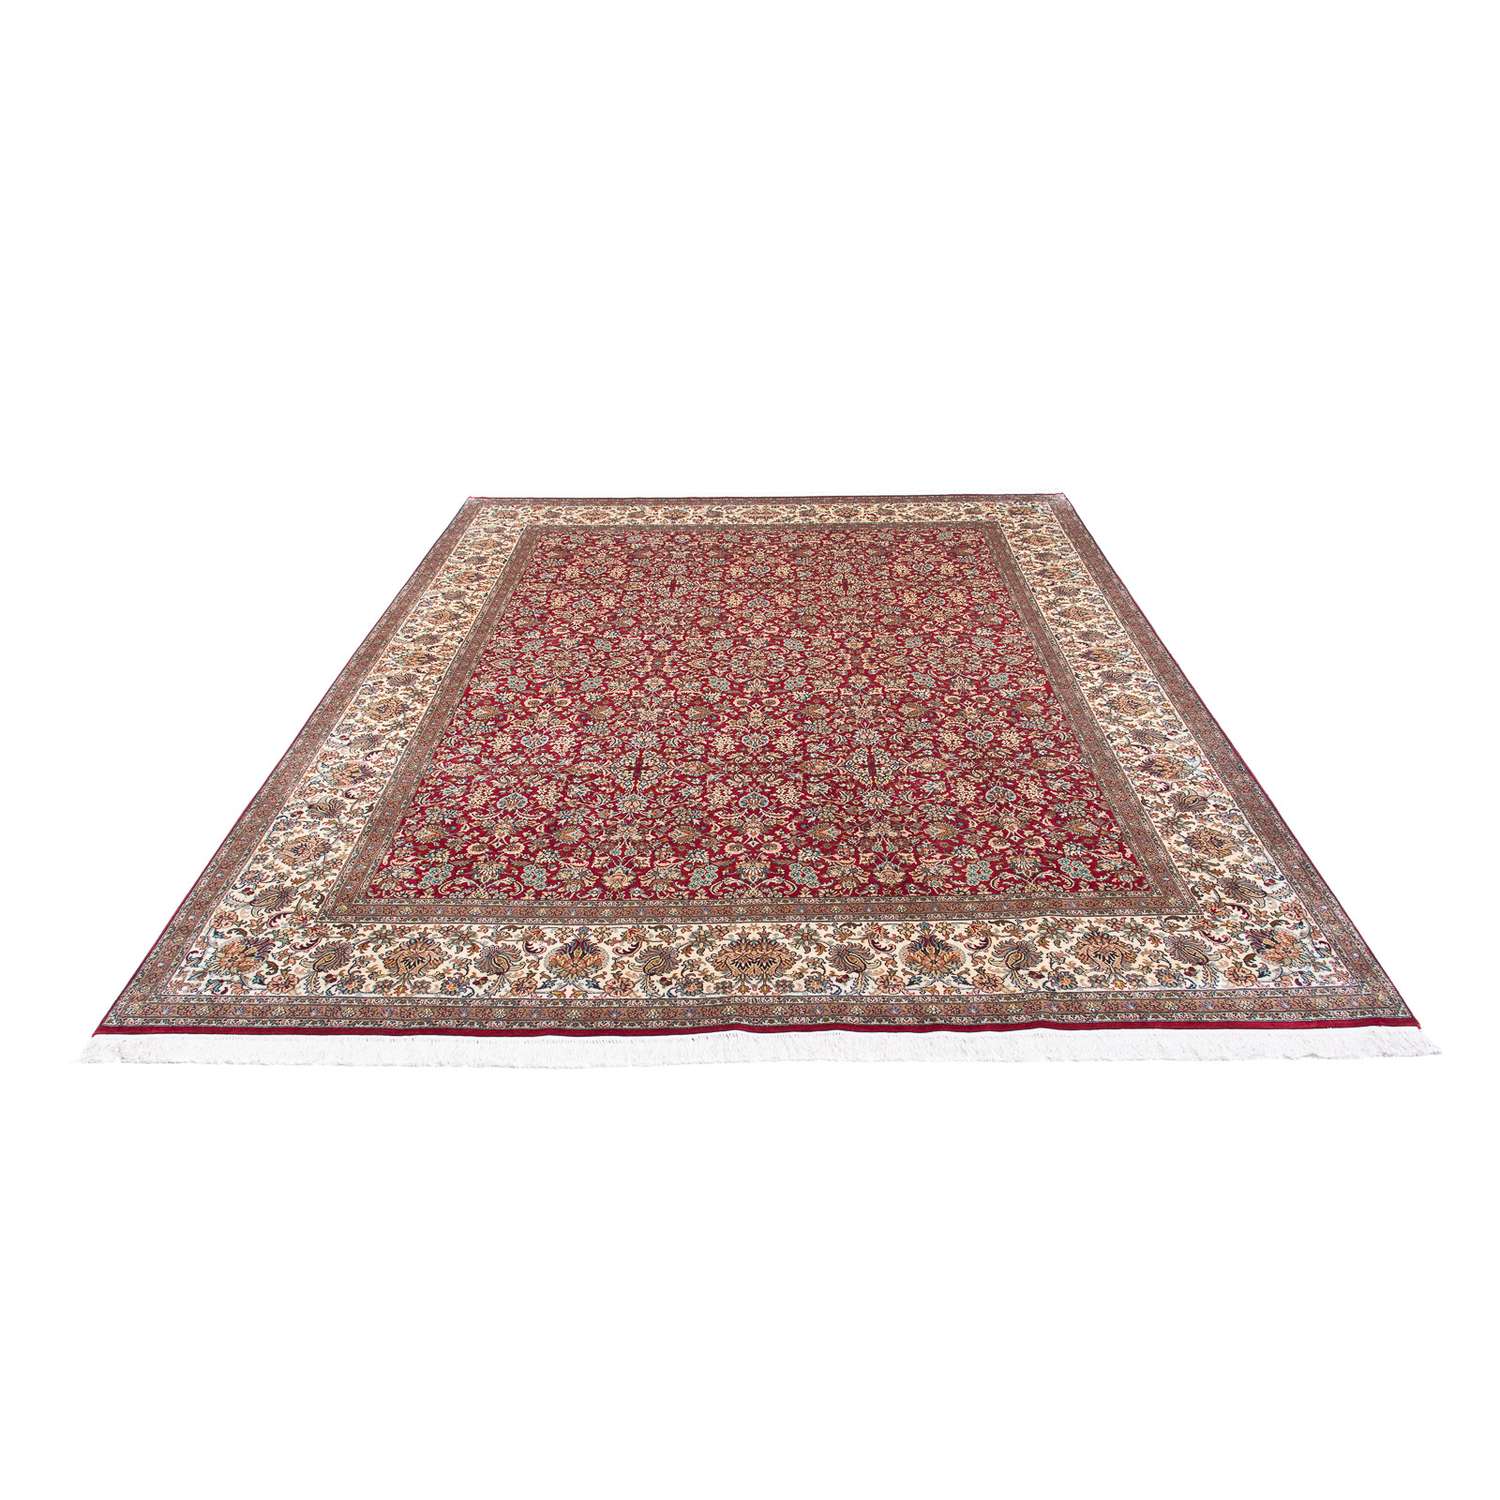 Perser Rug - Classic - 308 x 243 cm - light red